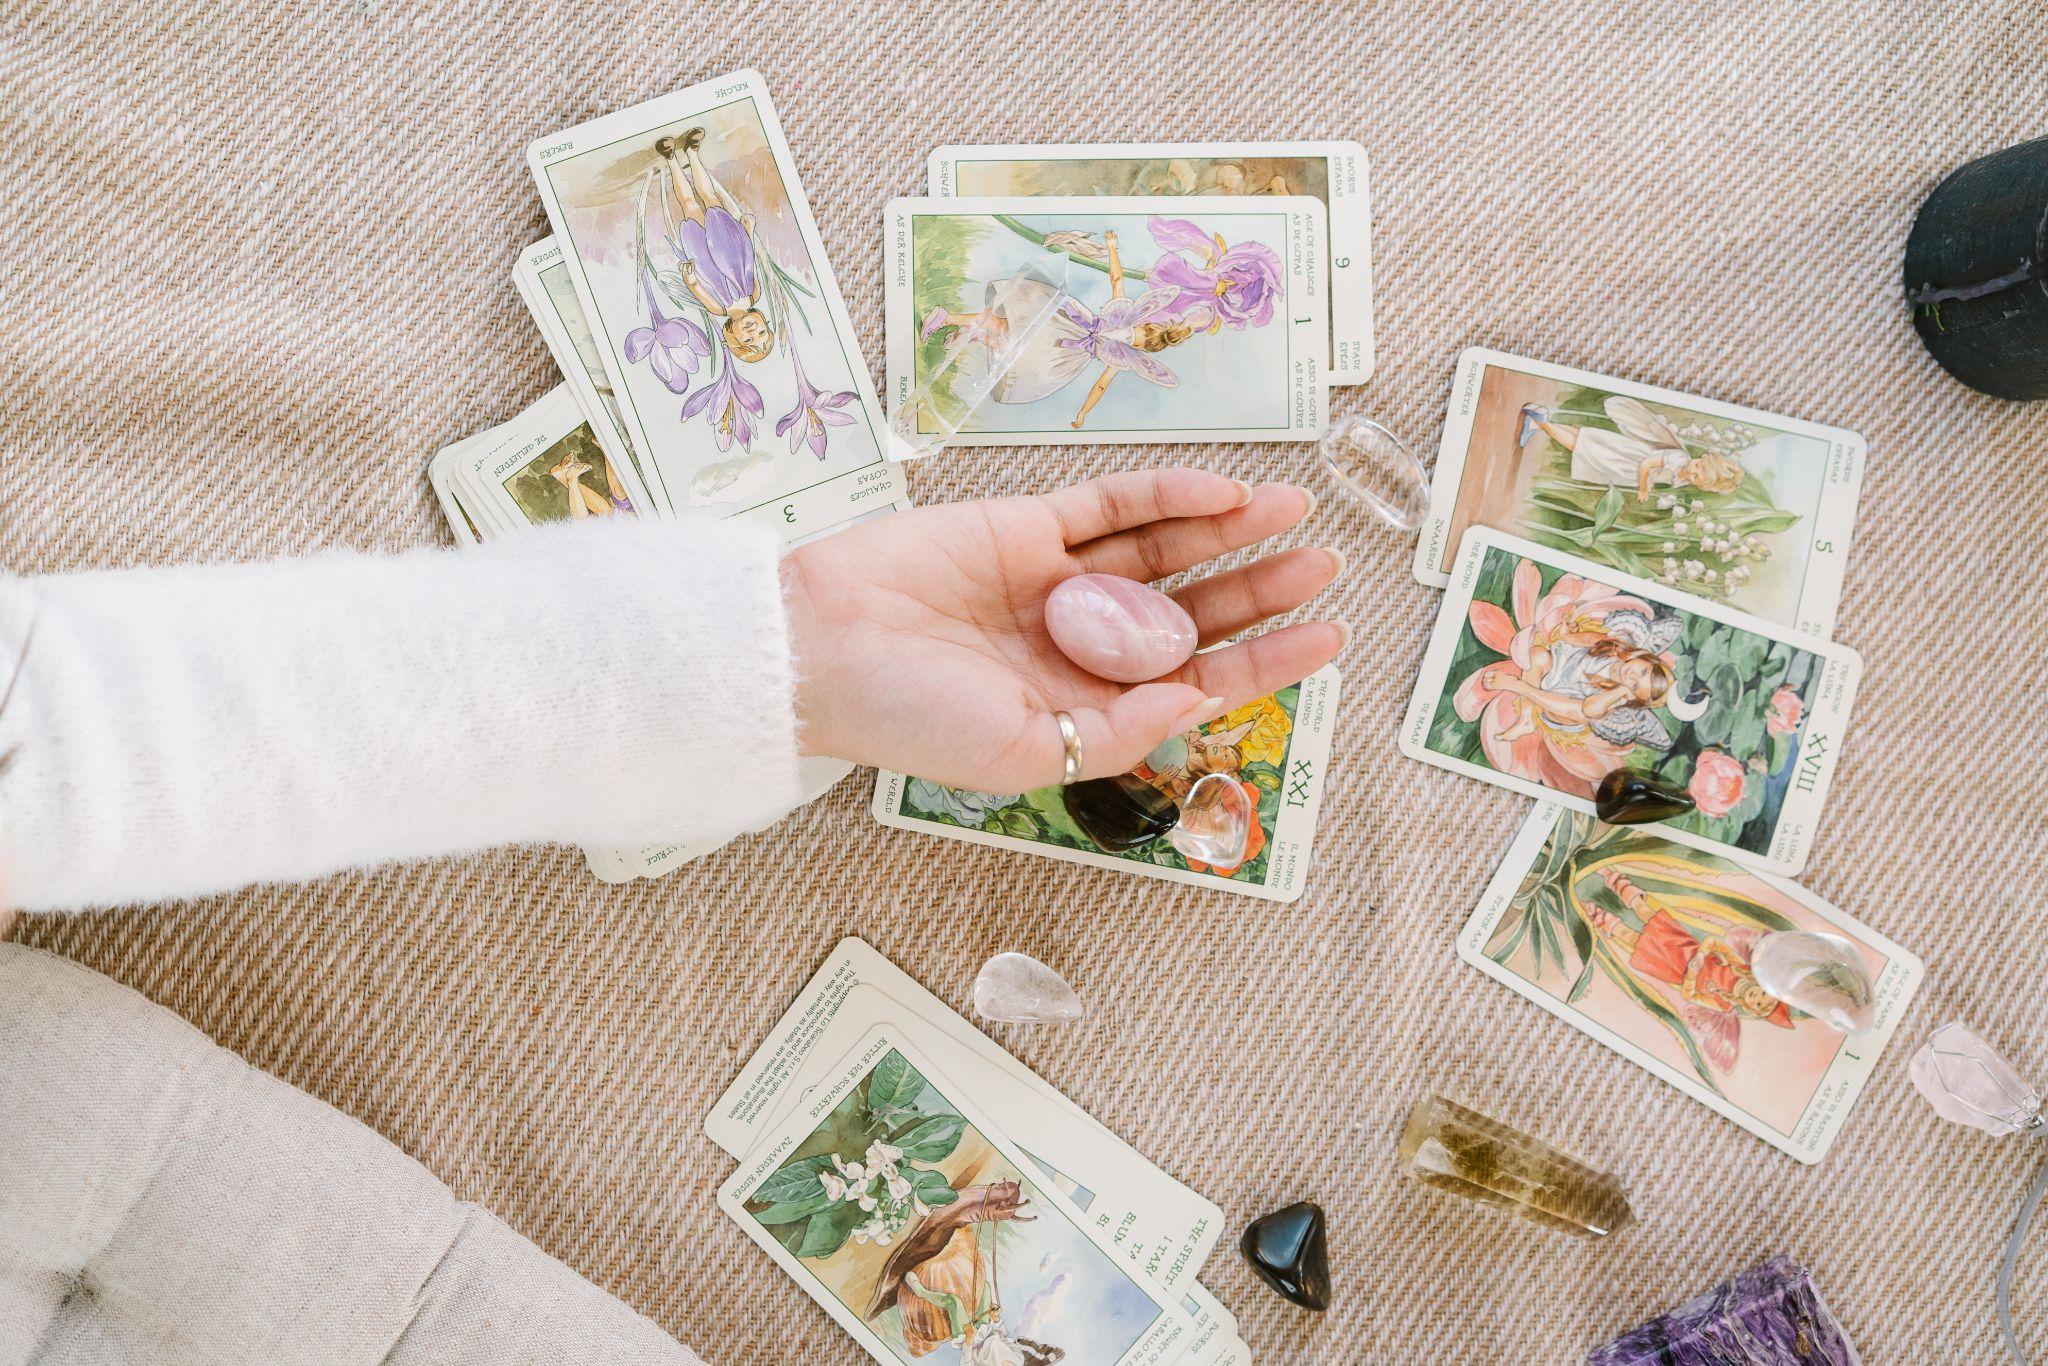 a person’s outstretched hand holding a crystal while an assortment of tarot cards and crystals lie on the surface below it